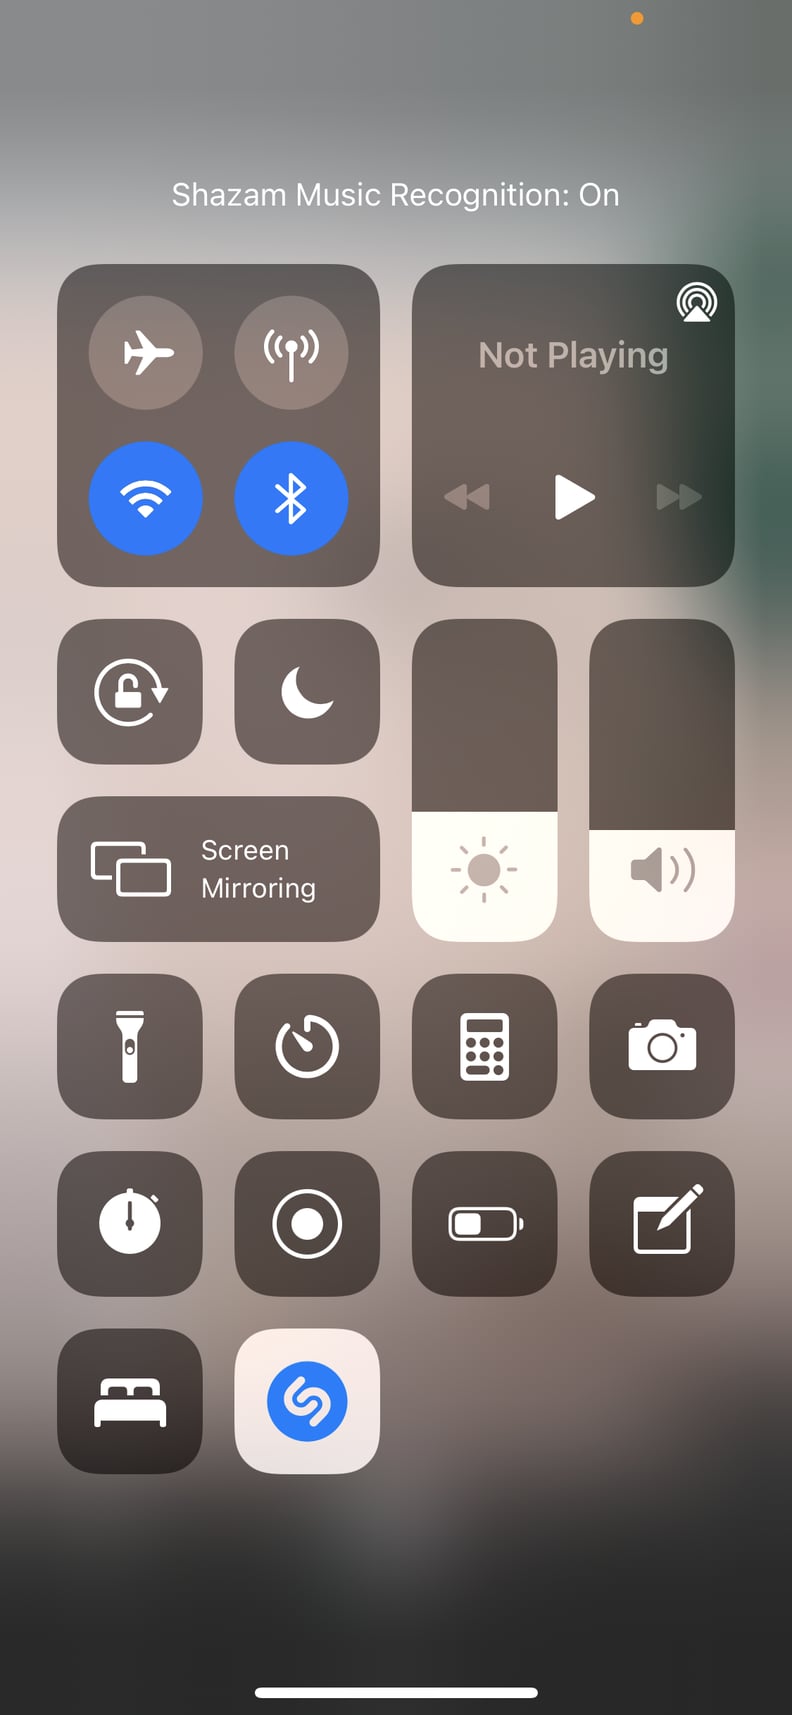 With the TikTok App Open, Swipe Open the Control Center and Tap the Shazam Button